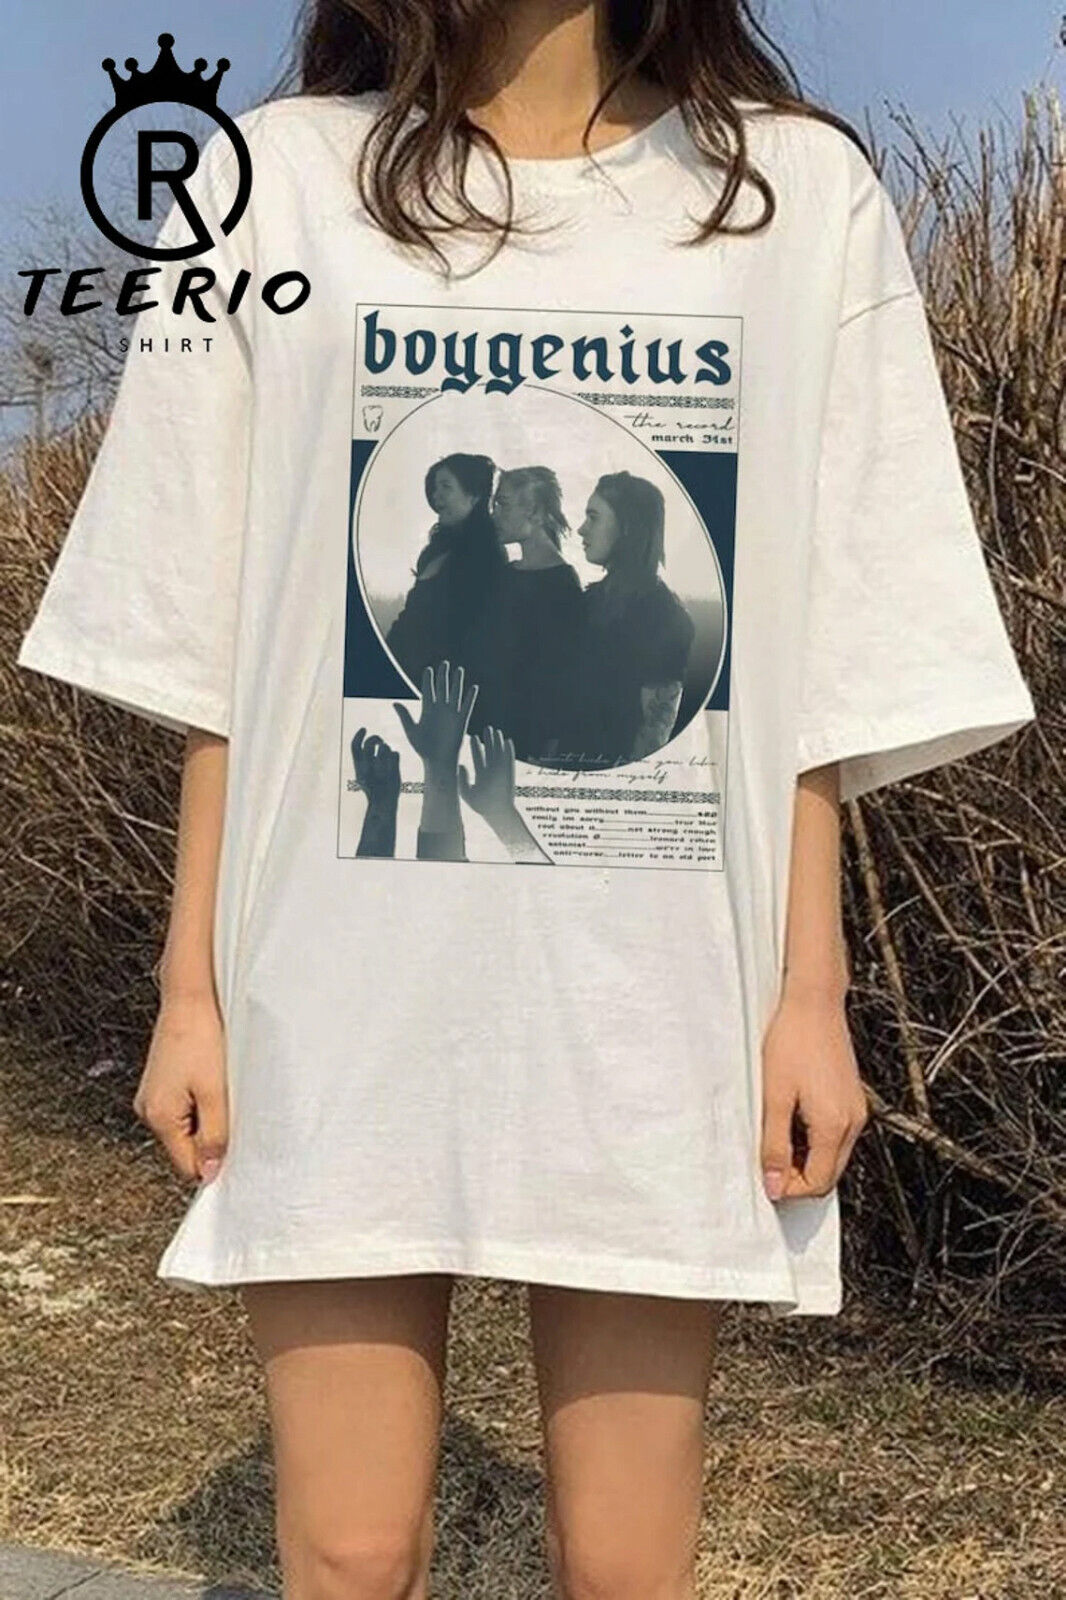 Get Authentic Boygenius Merch at Our Online Store